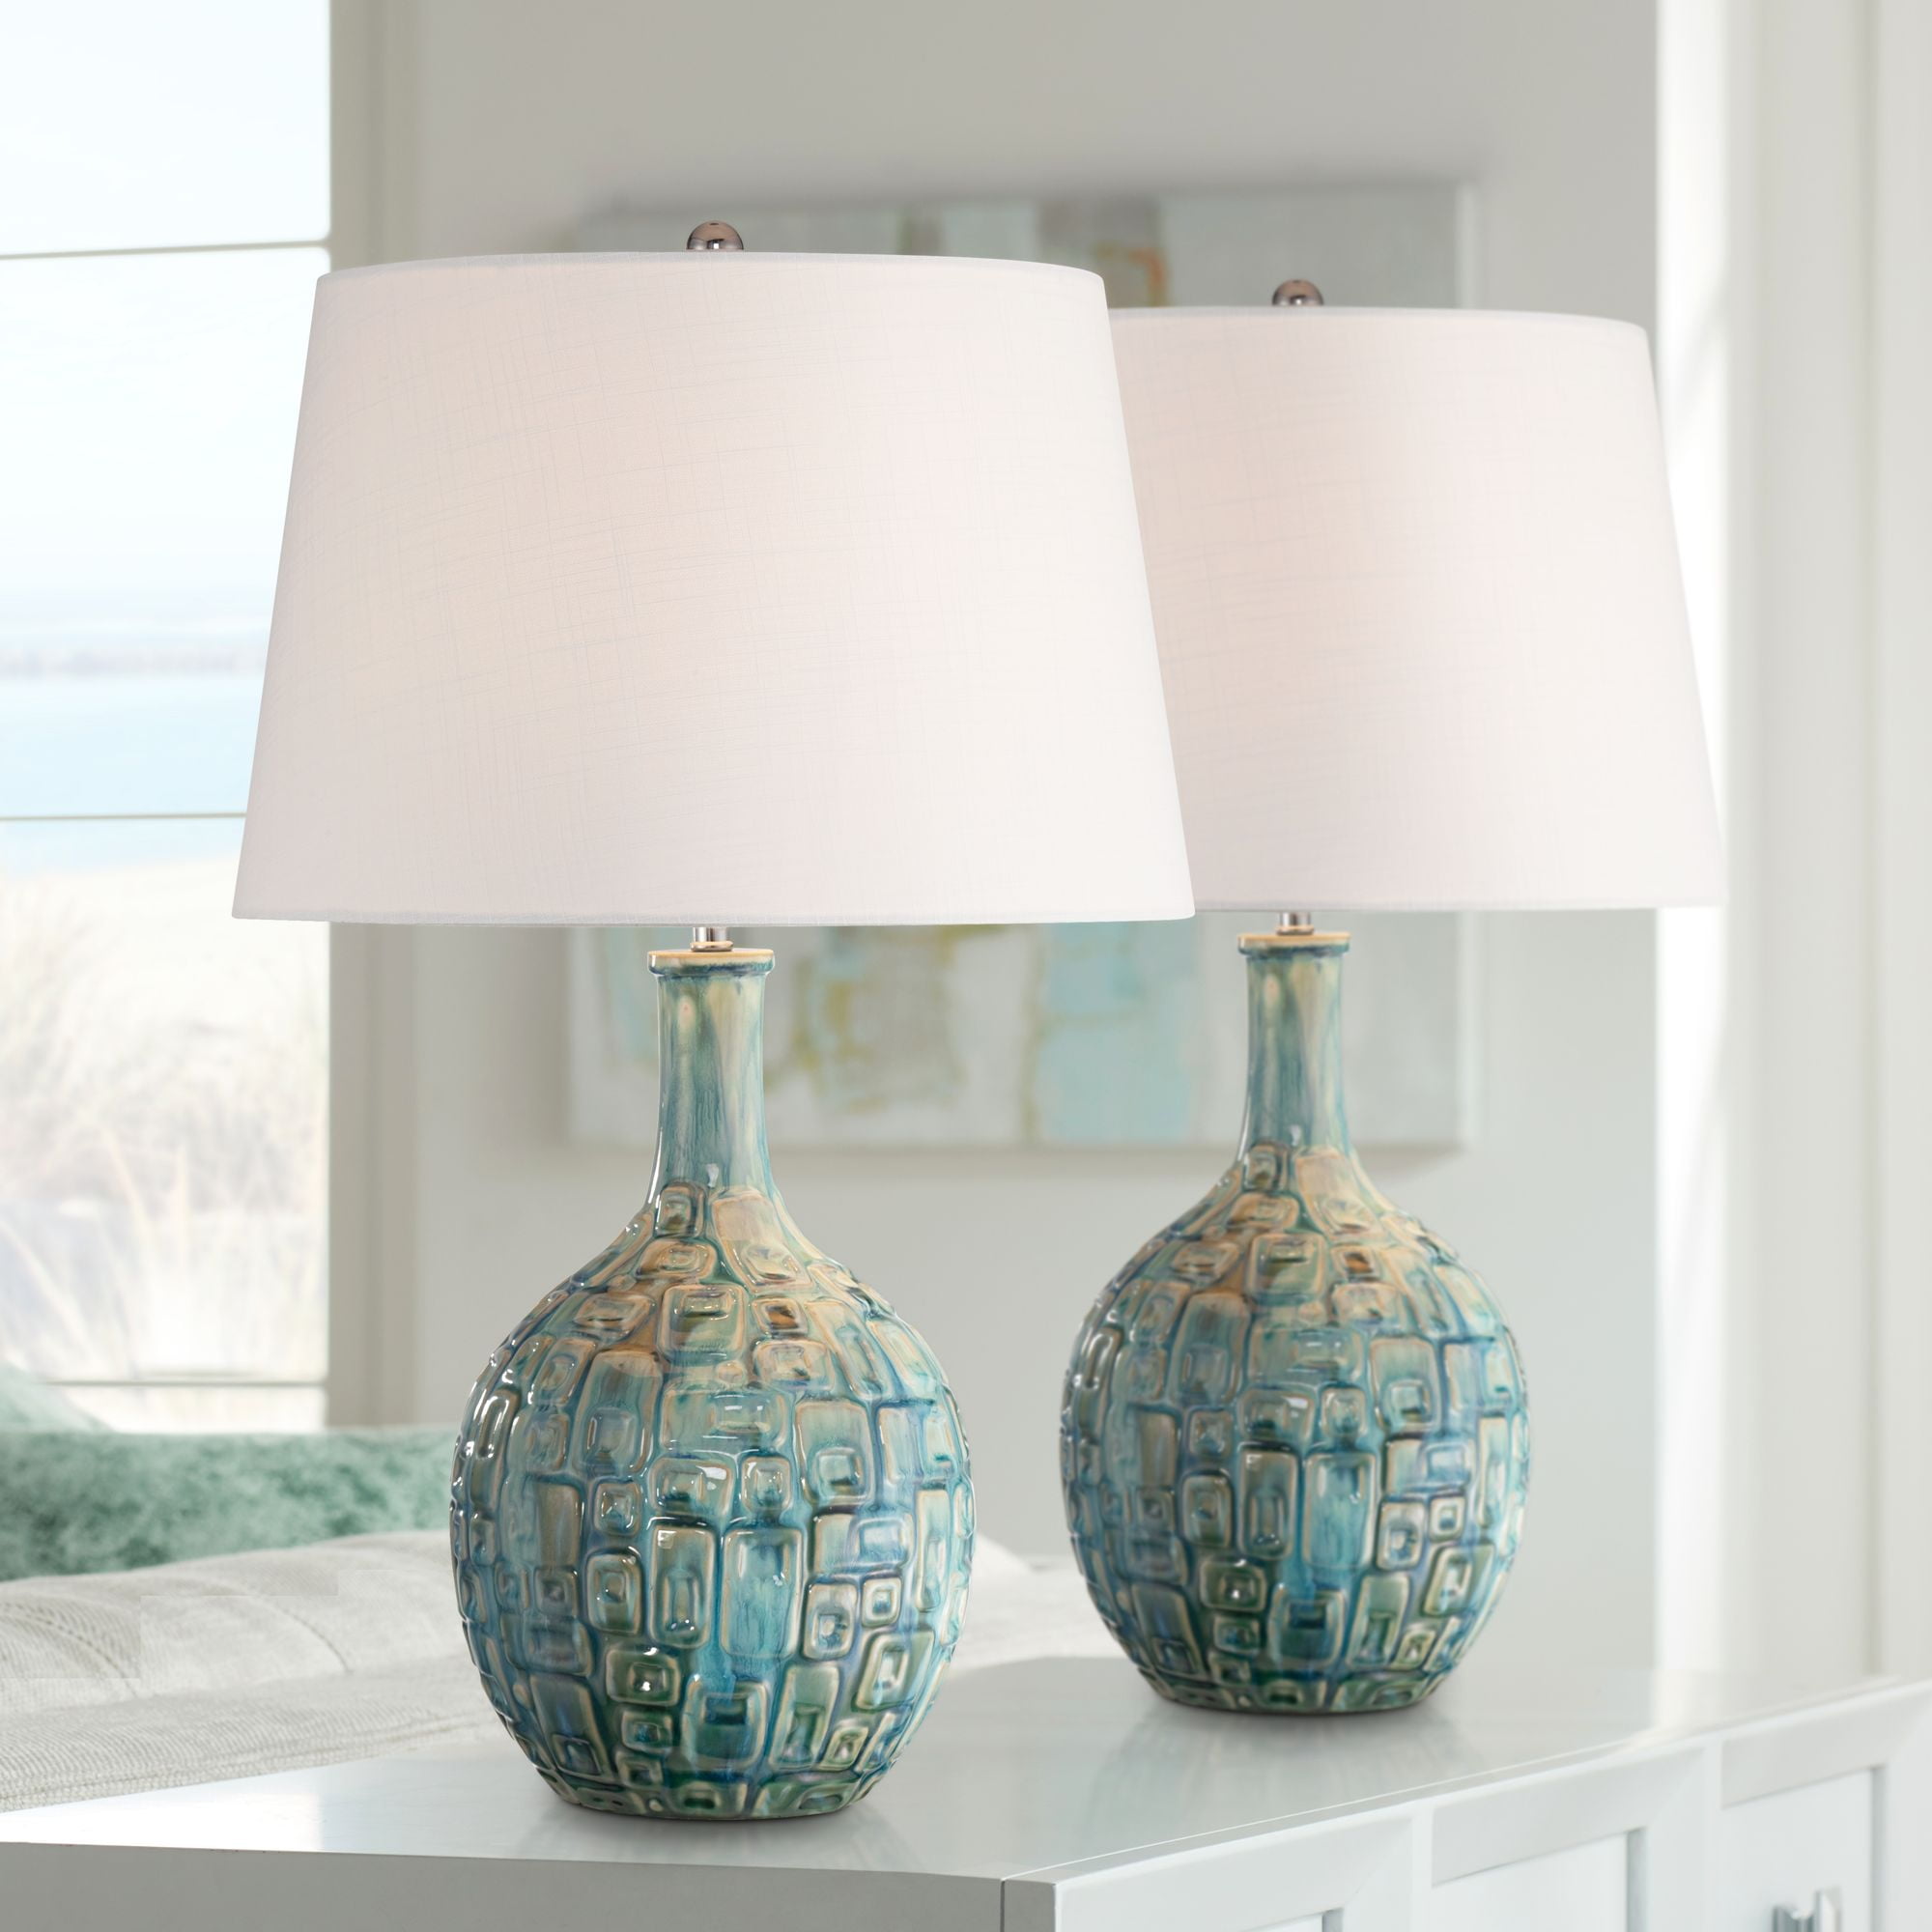 Girar en descubierto Irregularidades lb 360 Lighting Mid Century Modern Table Lamps 26" High Set of 2 Ceramic Teal  Glaze Handcrafted White Empire Shade for Living Room (Colors May Vary) -  Walmart.com